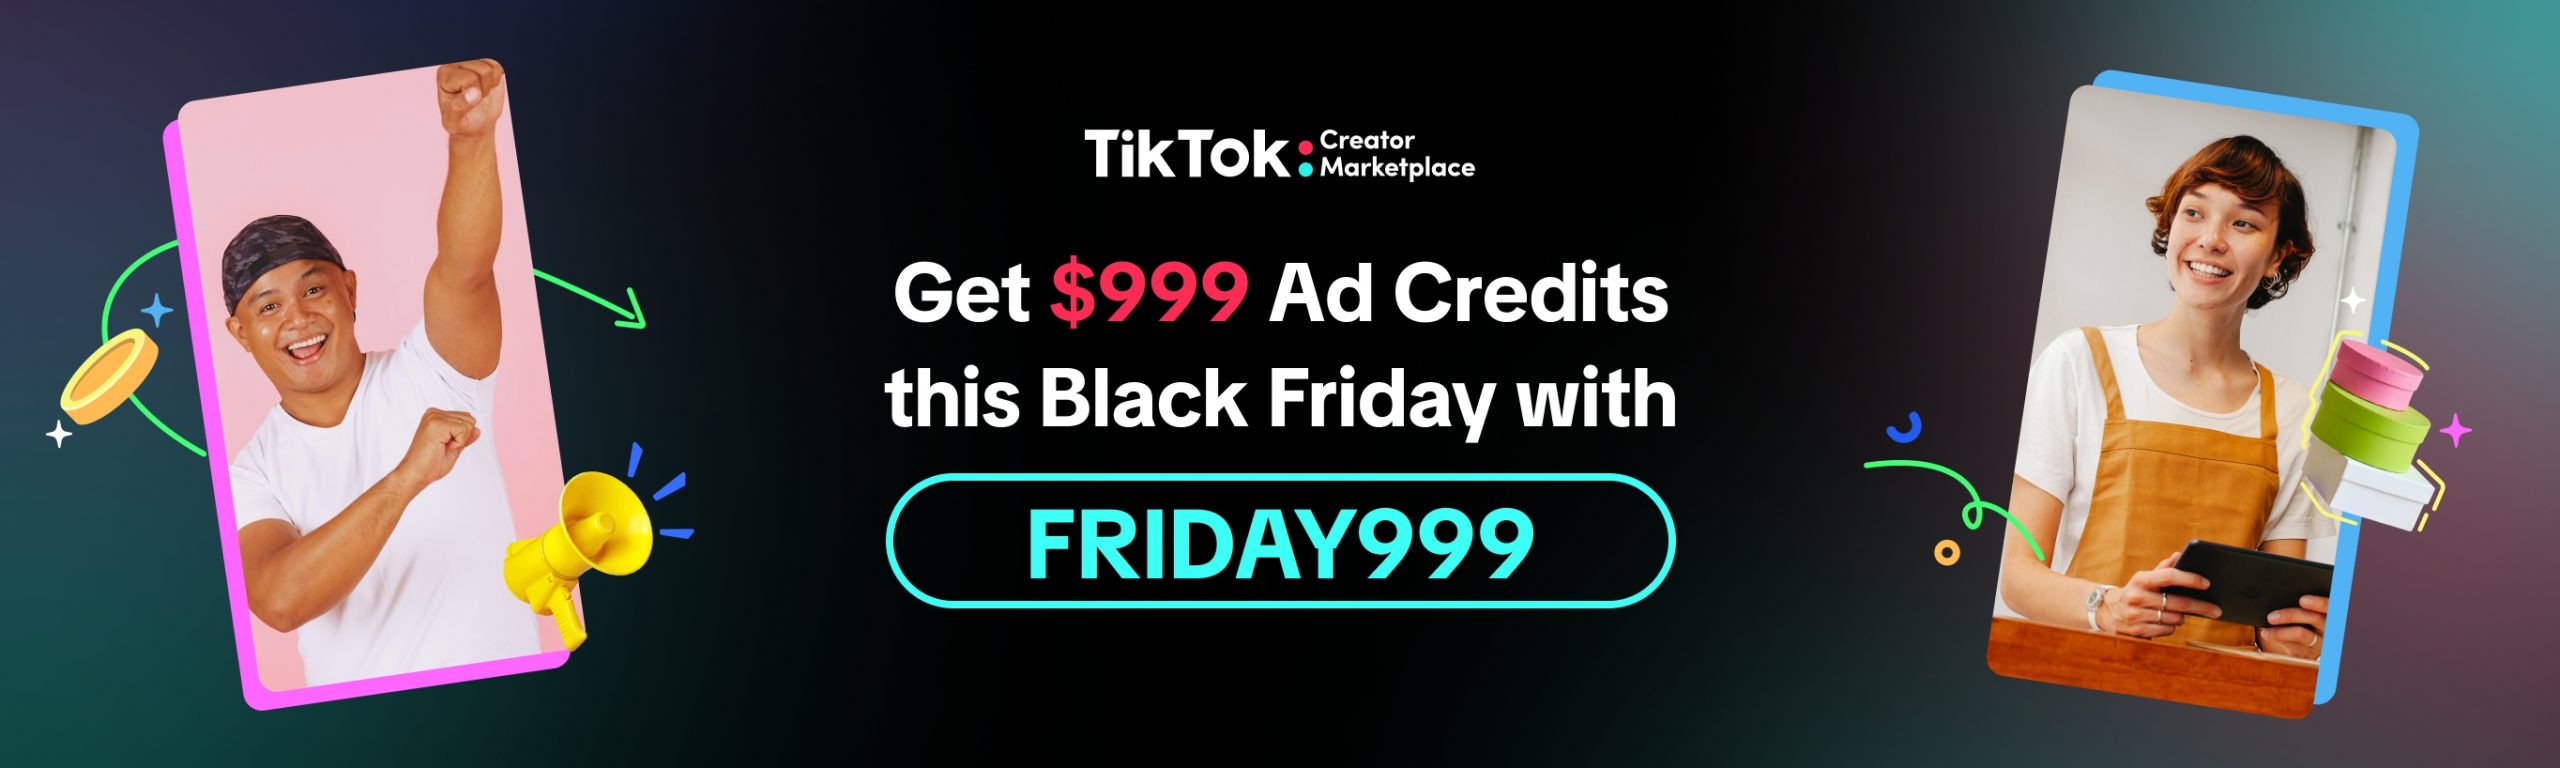 Get $999 Ad Credits this Black Friday with FRIDAY999